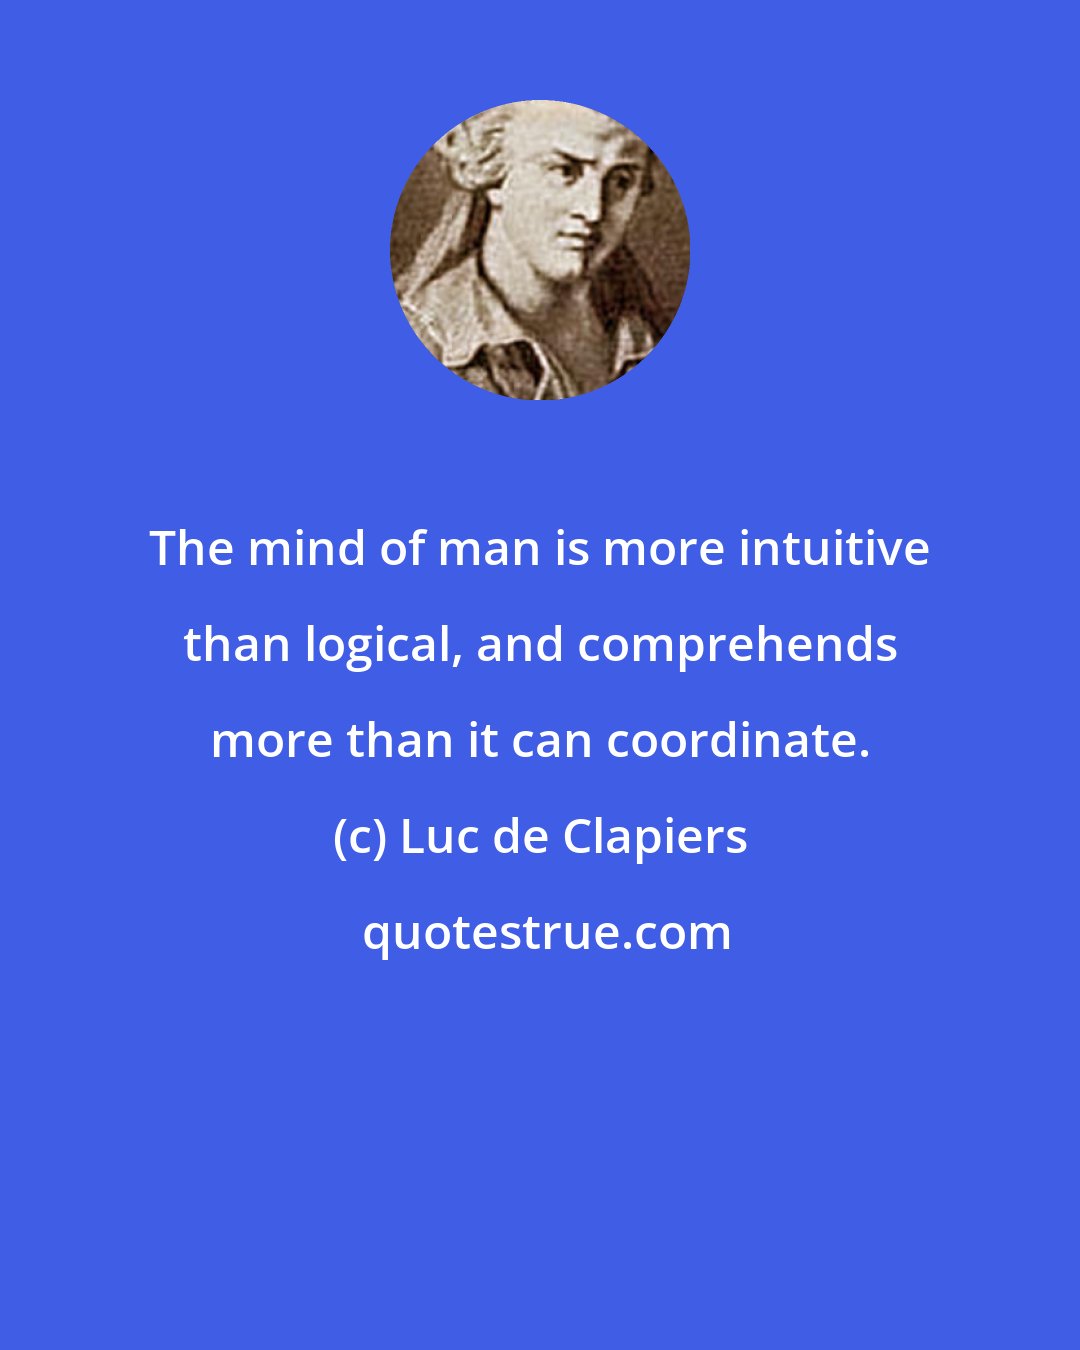 Luc de Clapiers: The mind of man is more intuitive than logical, and comprehends more than it can coordinate.